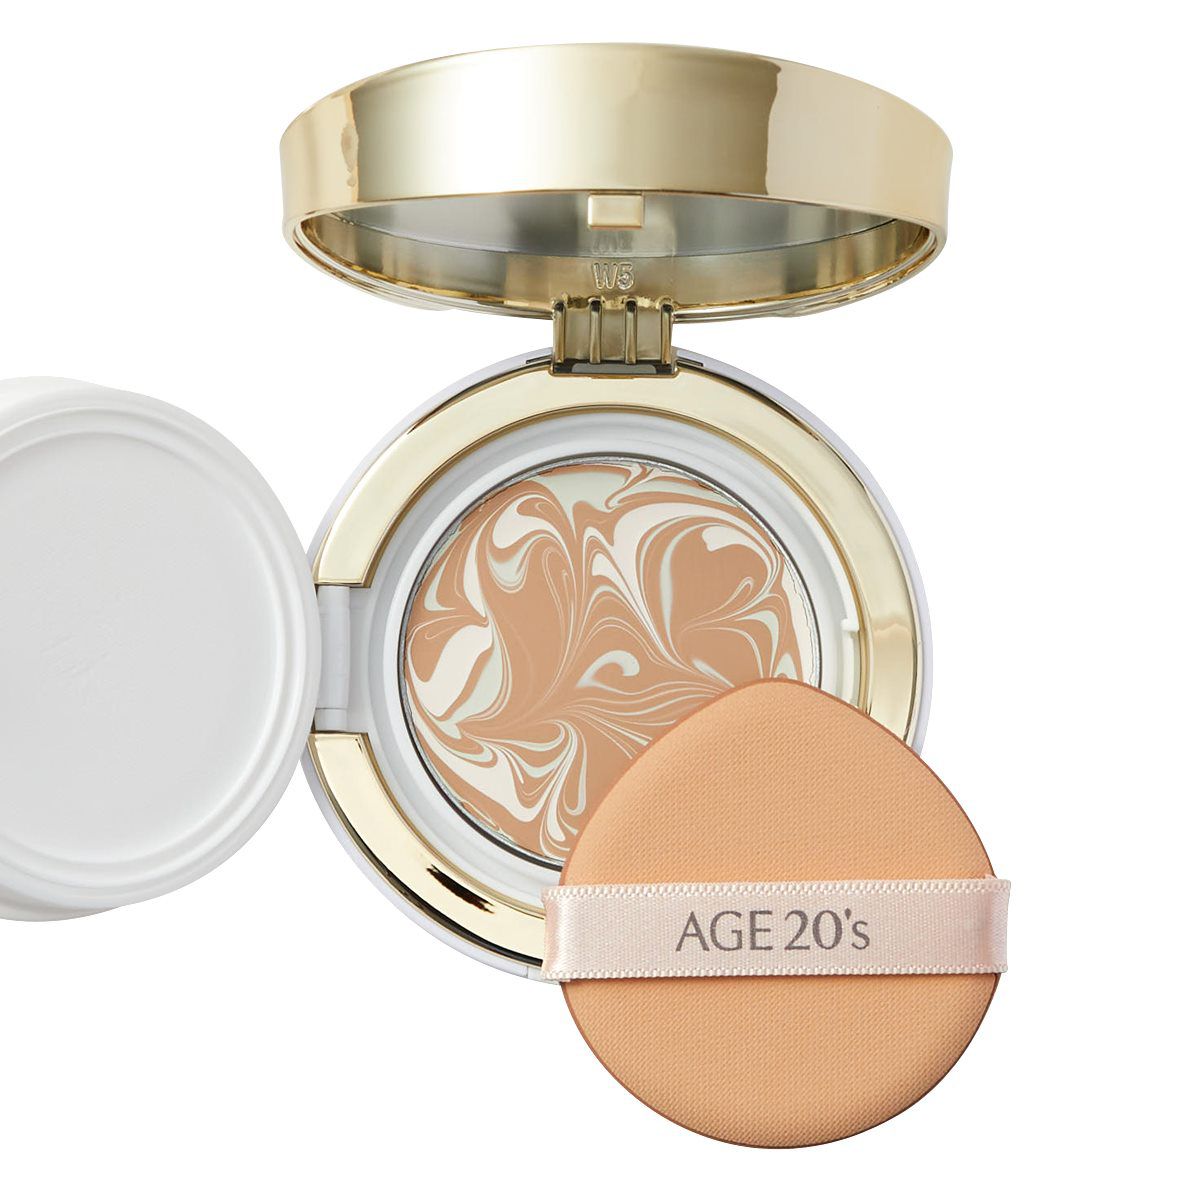 AGE 20's Signature Essence Cover Pact Long Stay SPF50+/PA++++ (no.21) 14g*2のバリエーション1